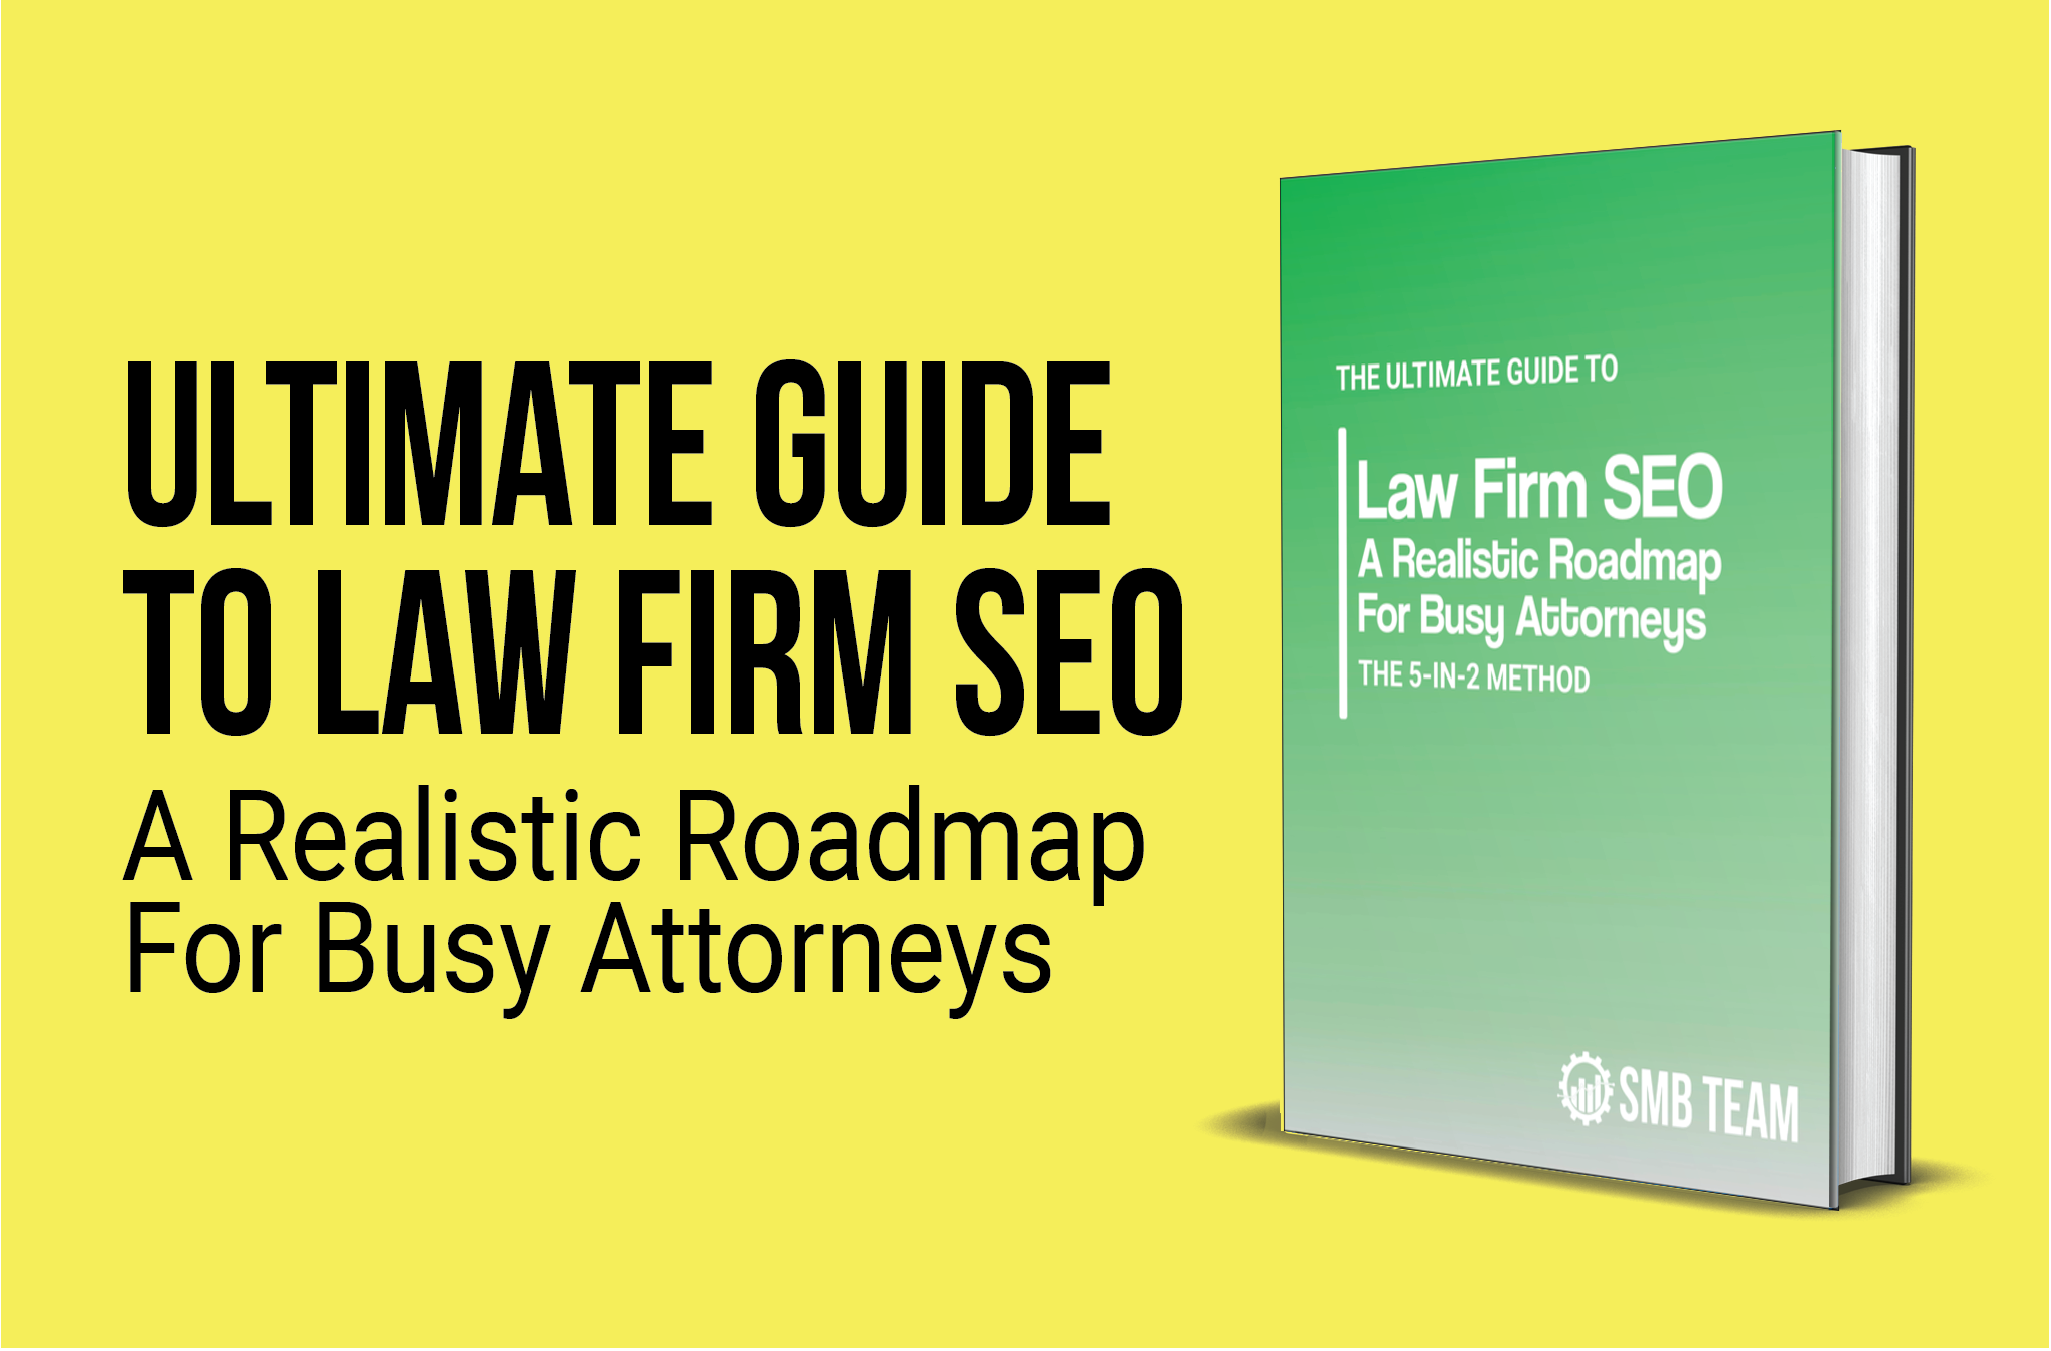 The Ultimate Guide to Law Firm SEO | Get 80% of the Results in 2 Hours of Work Per-Month with the 5-in-2 Technique